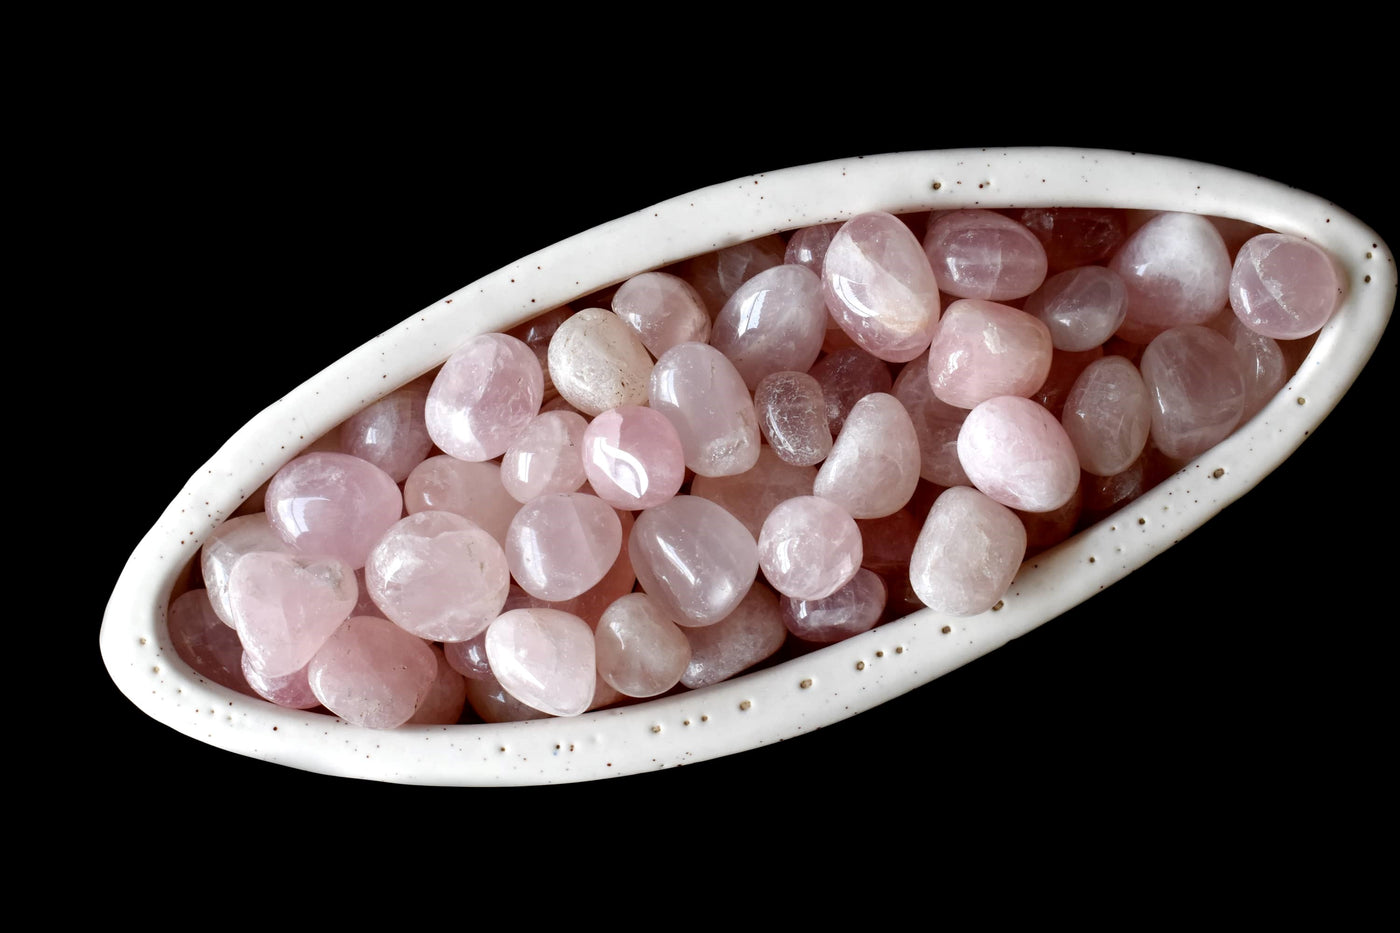 Rose Quartz Tumbled Crystals (Anxiety Relief and Relaxation)